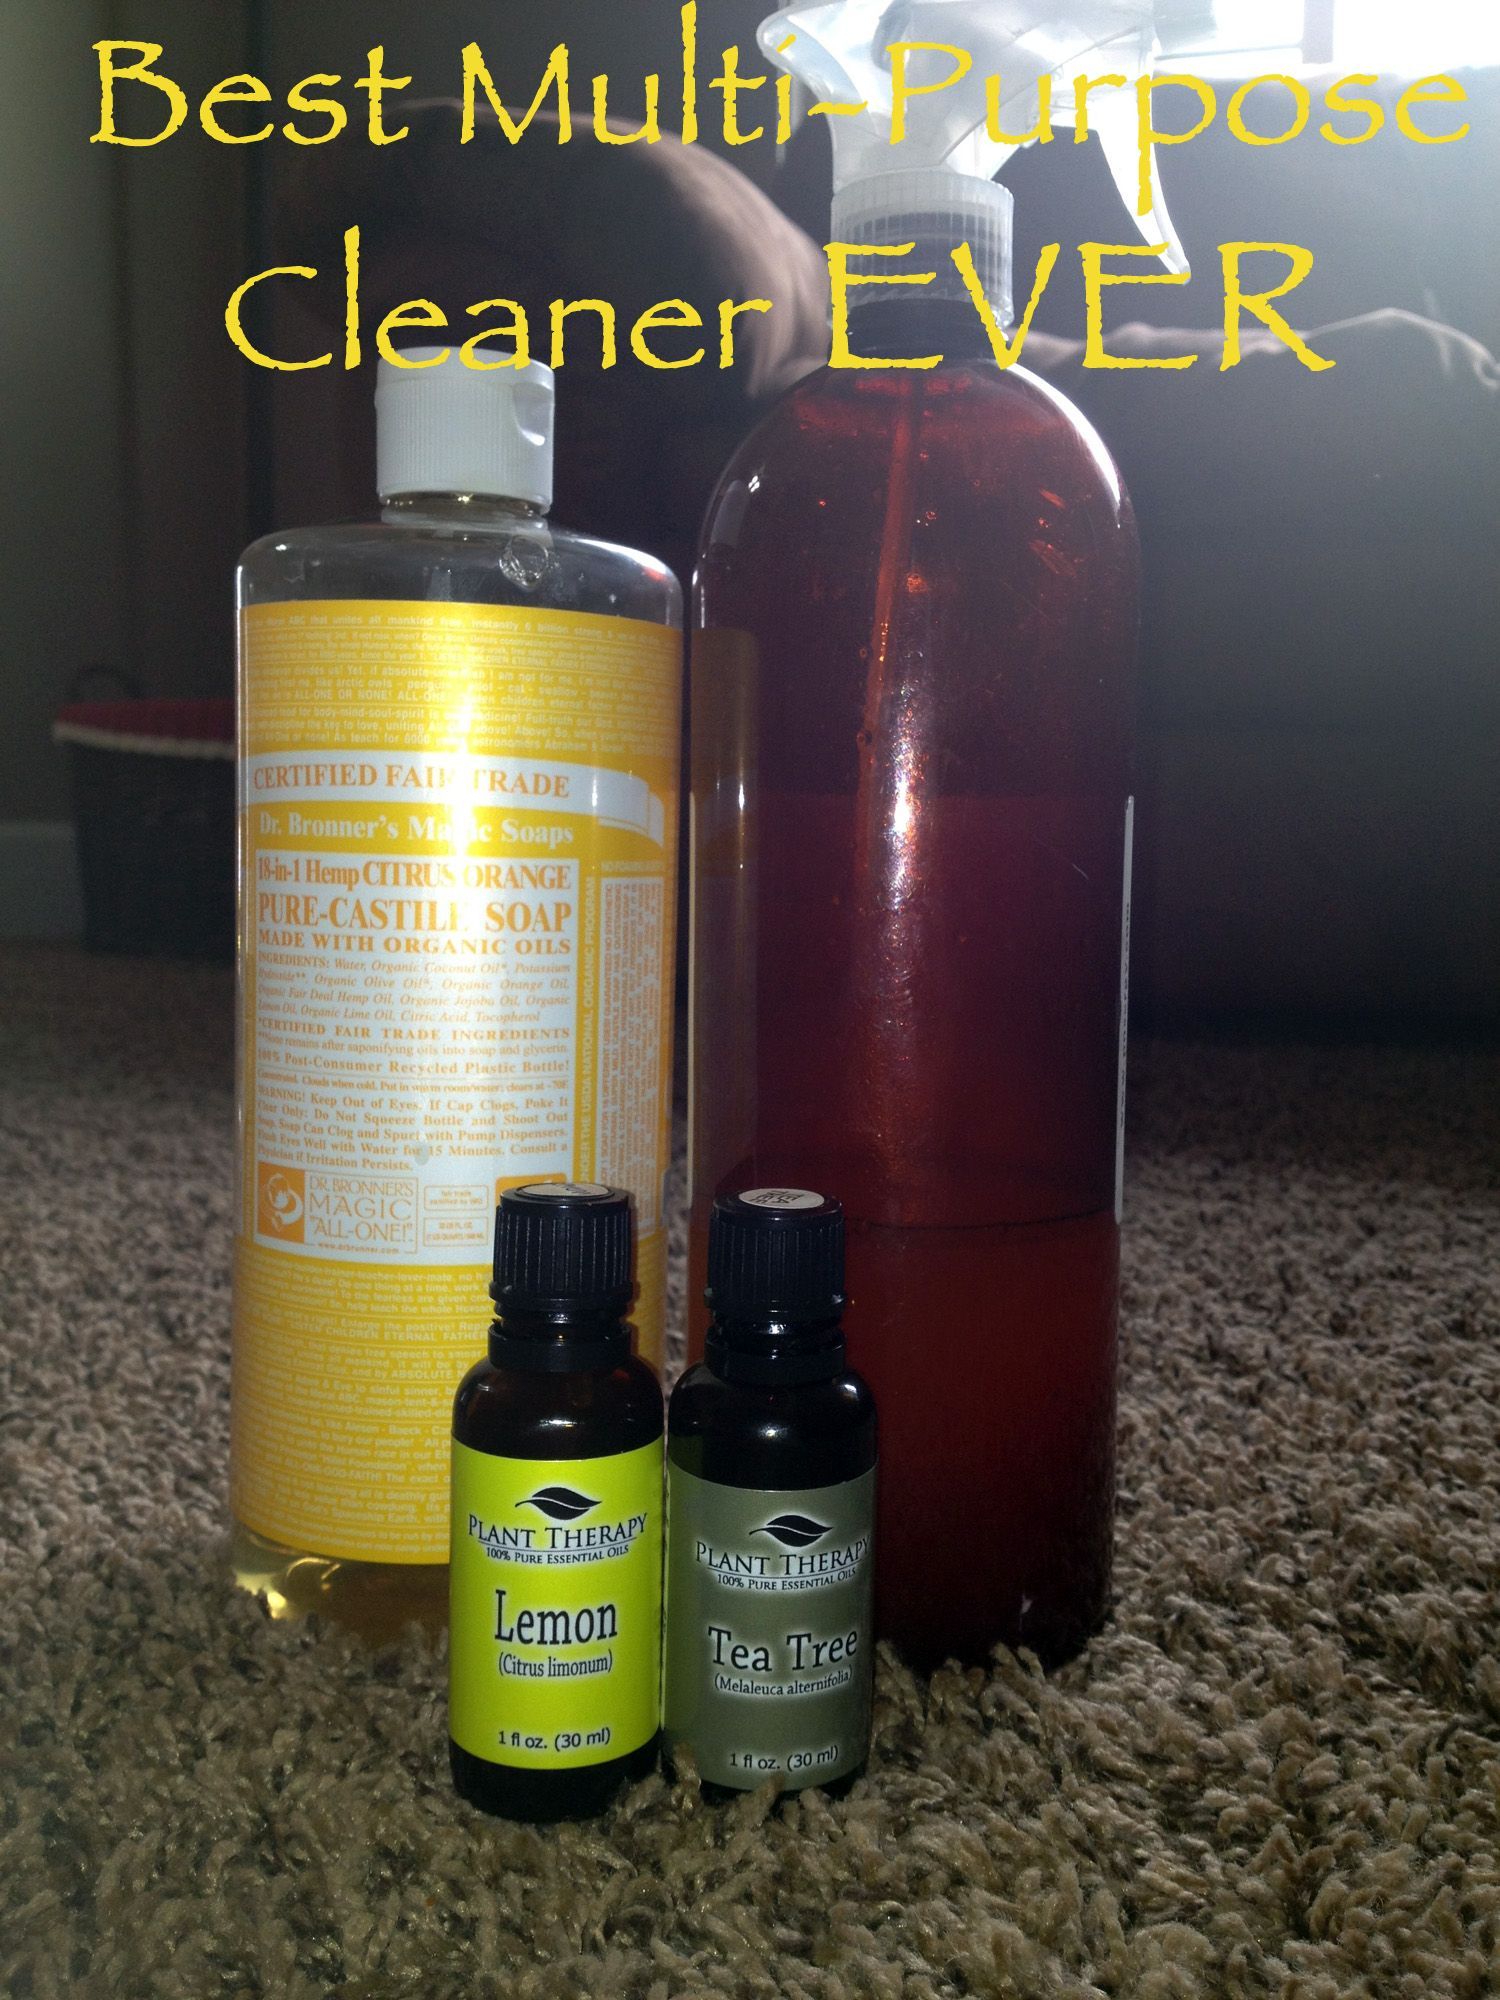 This really is my most favorite cleaner! This recipe was found during a Spring Cleaning Contest! I love, love, love it!!!!!